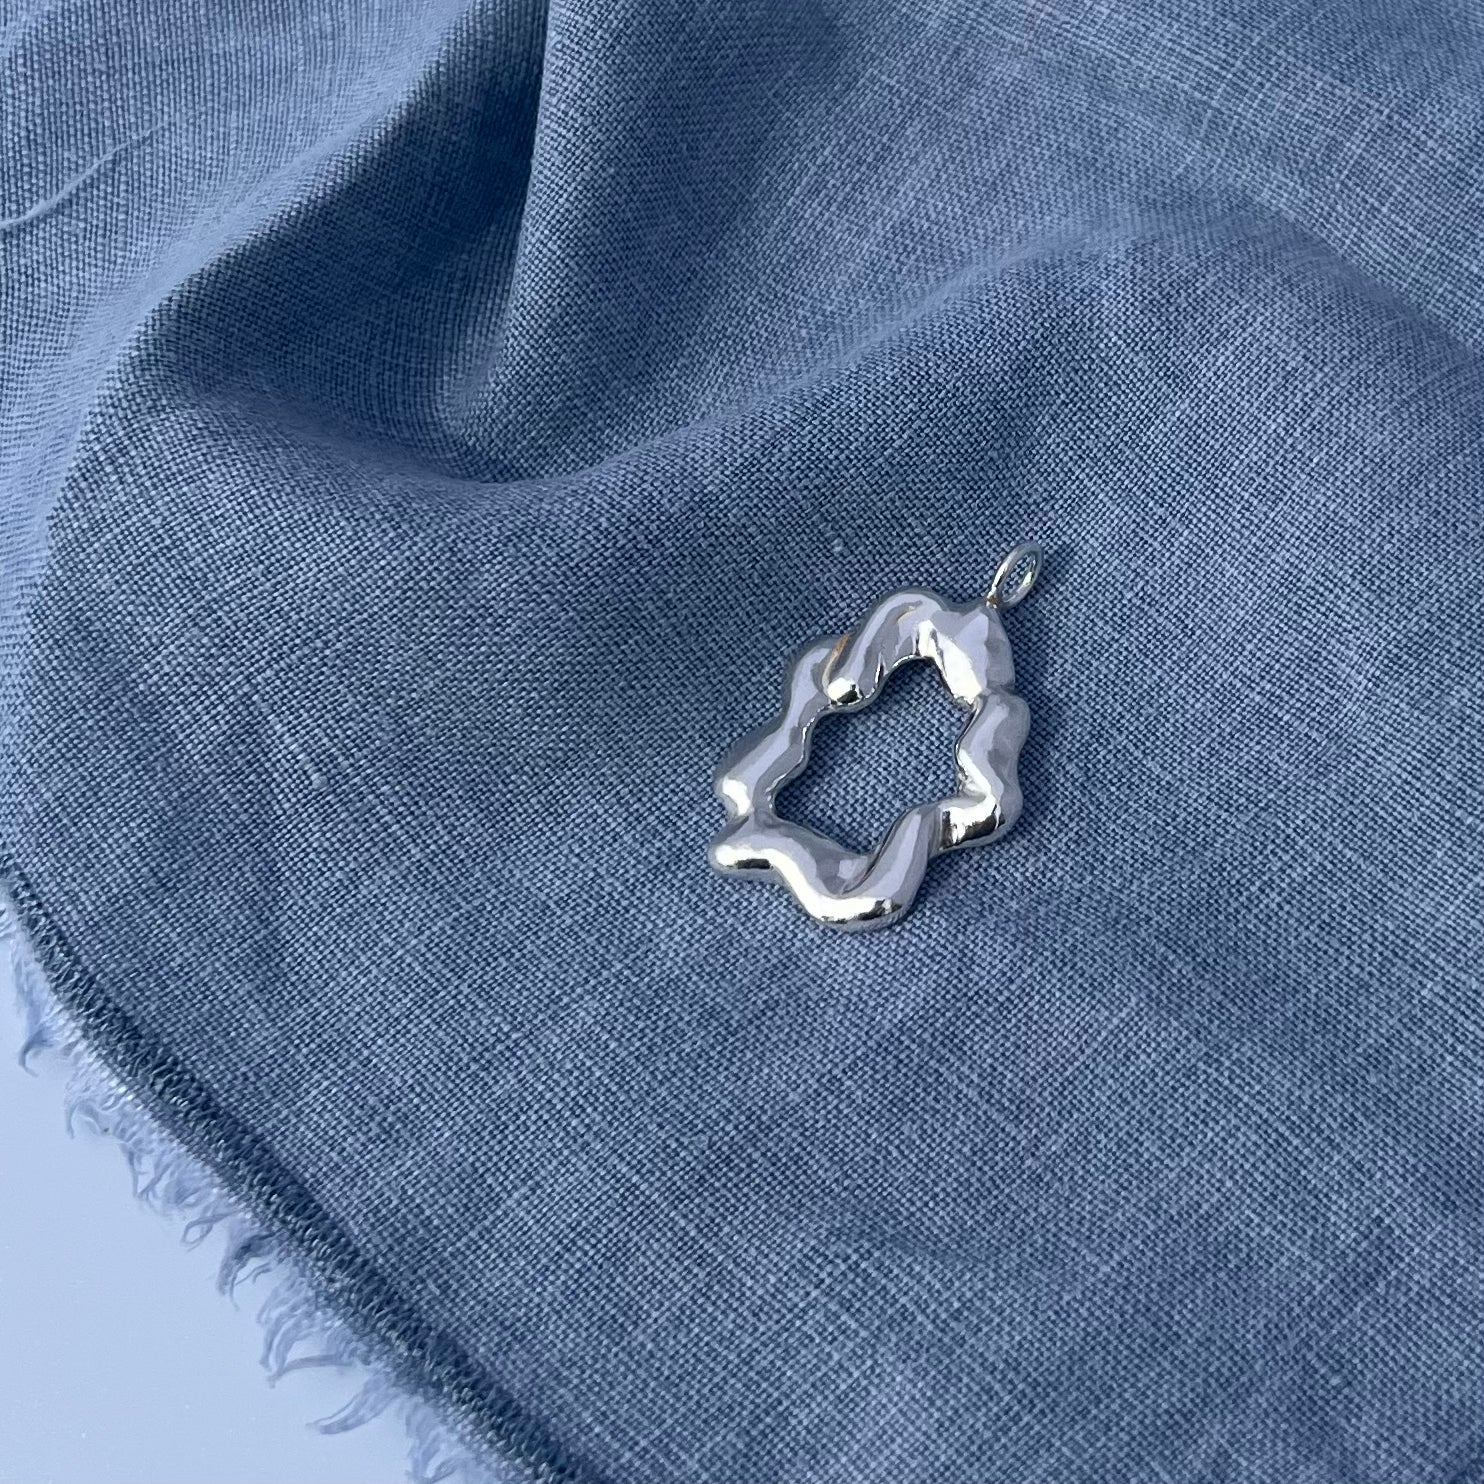 The 'Cloud pendant'. A handmade, sterling silver abstract shaped pendant. The background is blue linen.